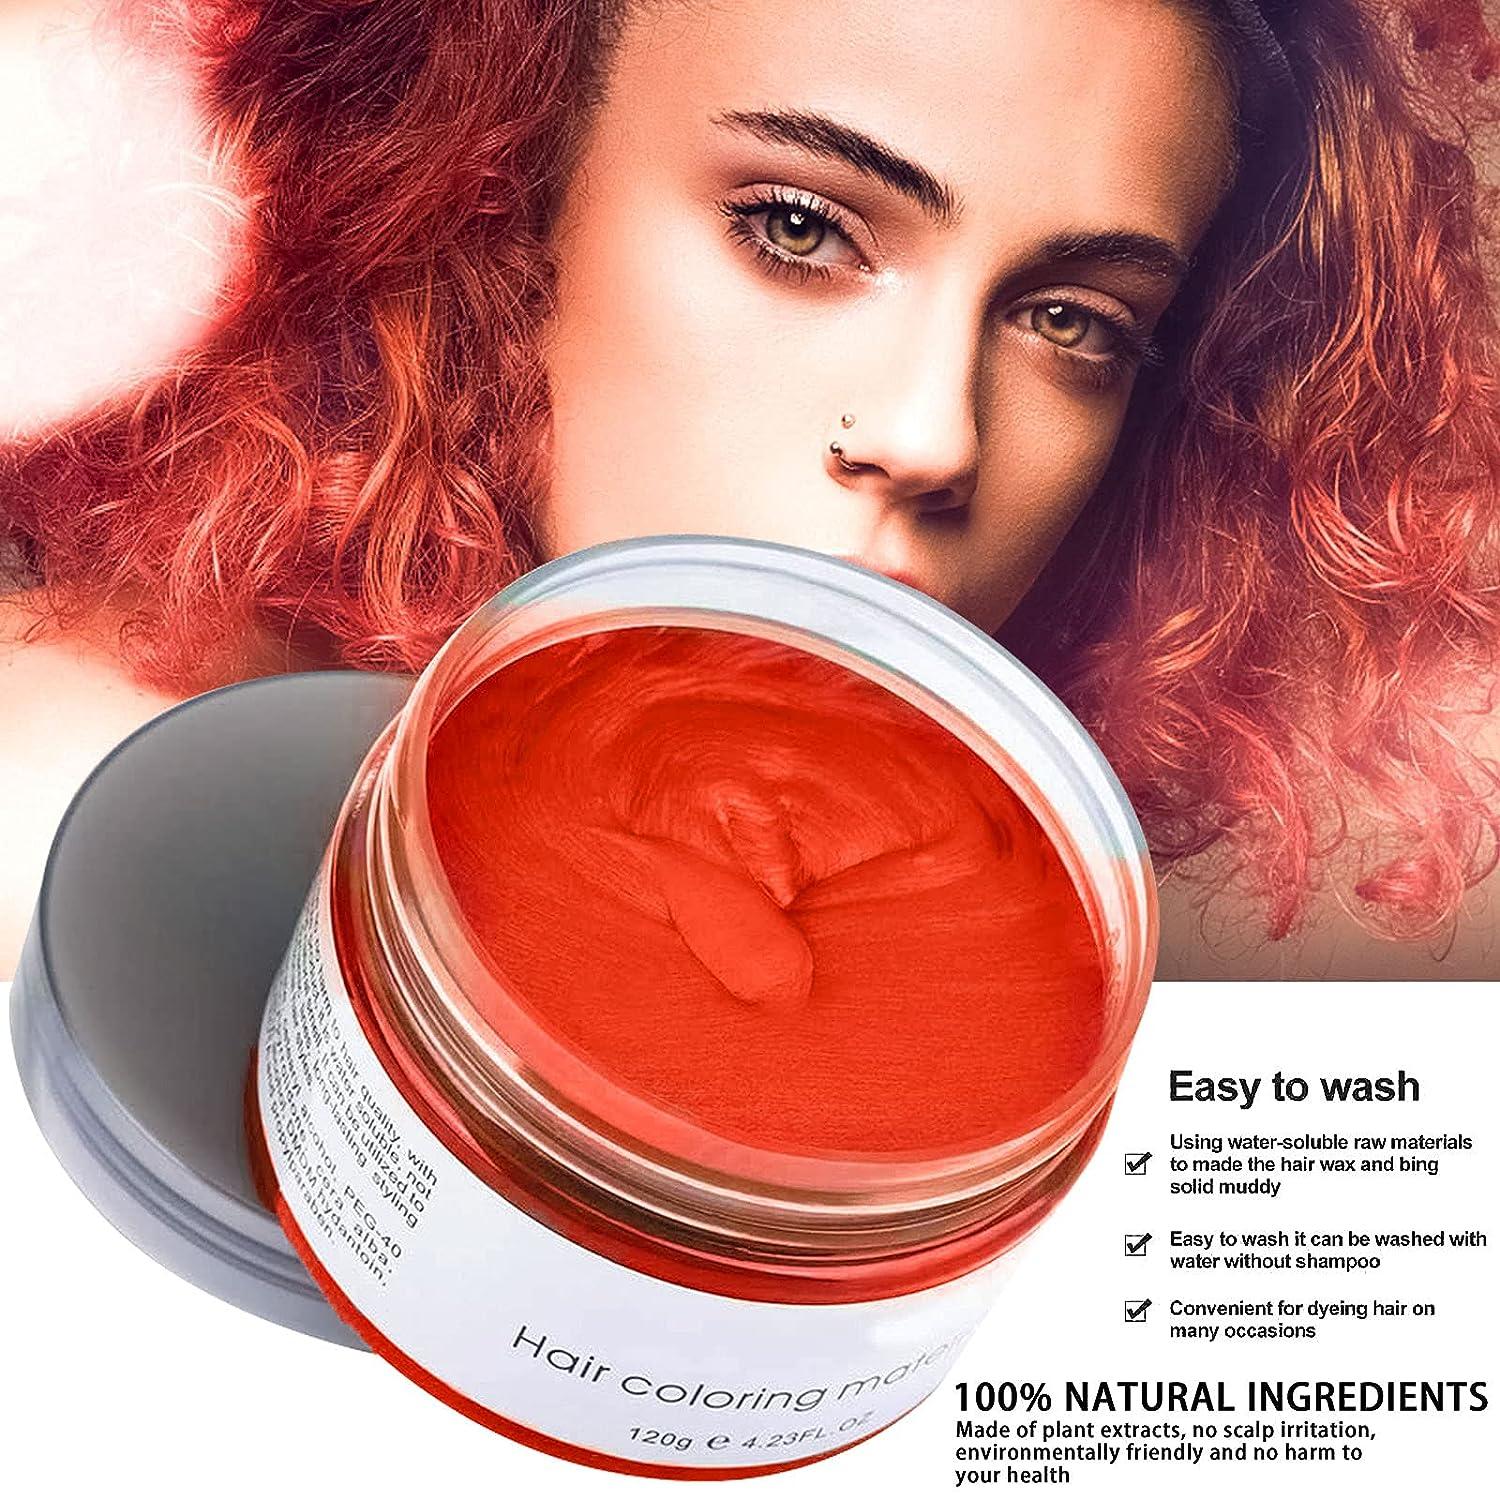 MOFAJANG Hair Coloring Wax, Blue Temporary Hairstyle Cream, Natural  Hairstyle Color Pomade, Washable Hair Dye Styling Wax Cream Mud